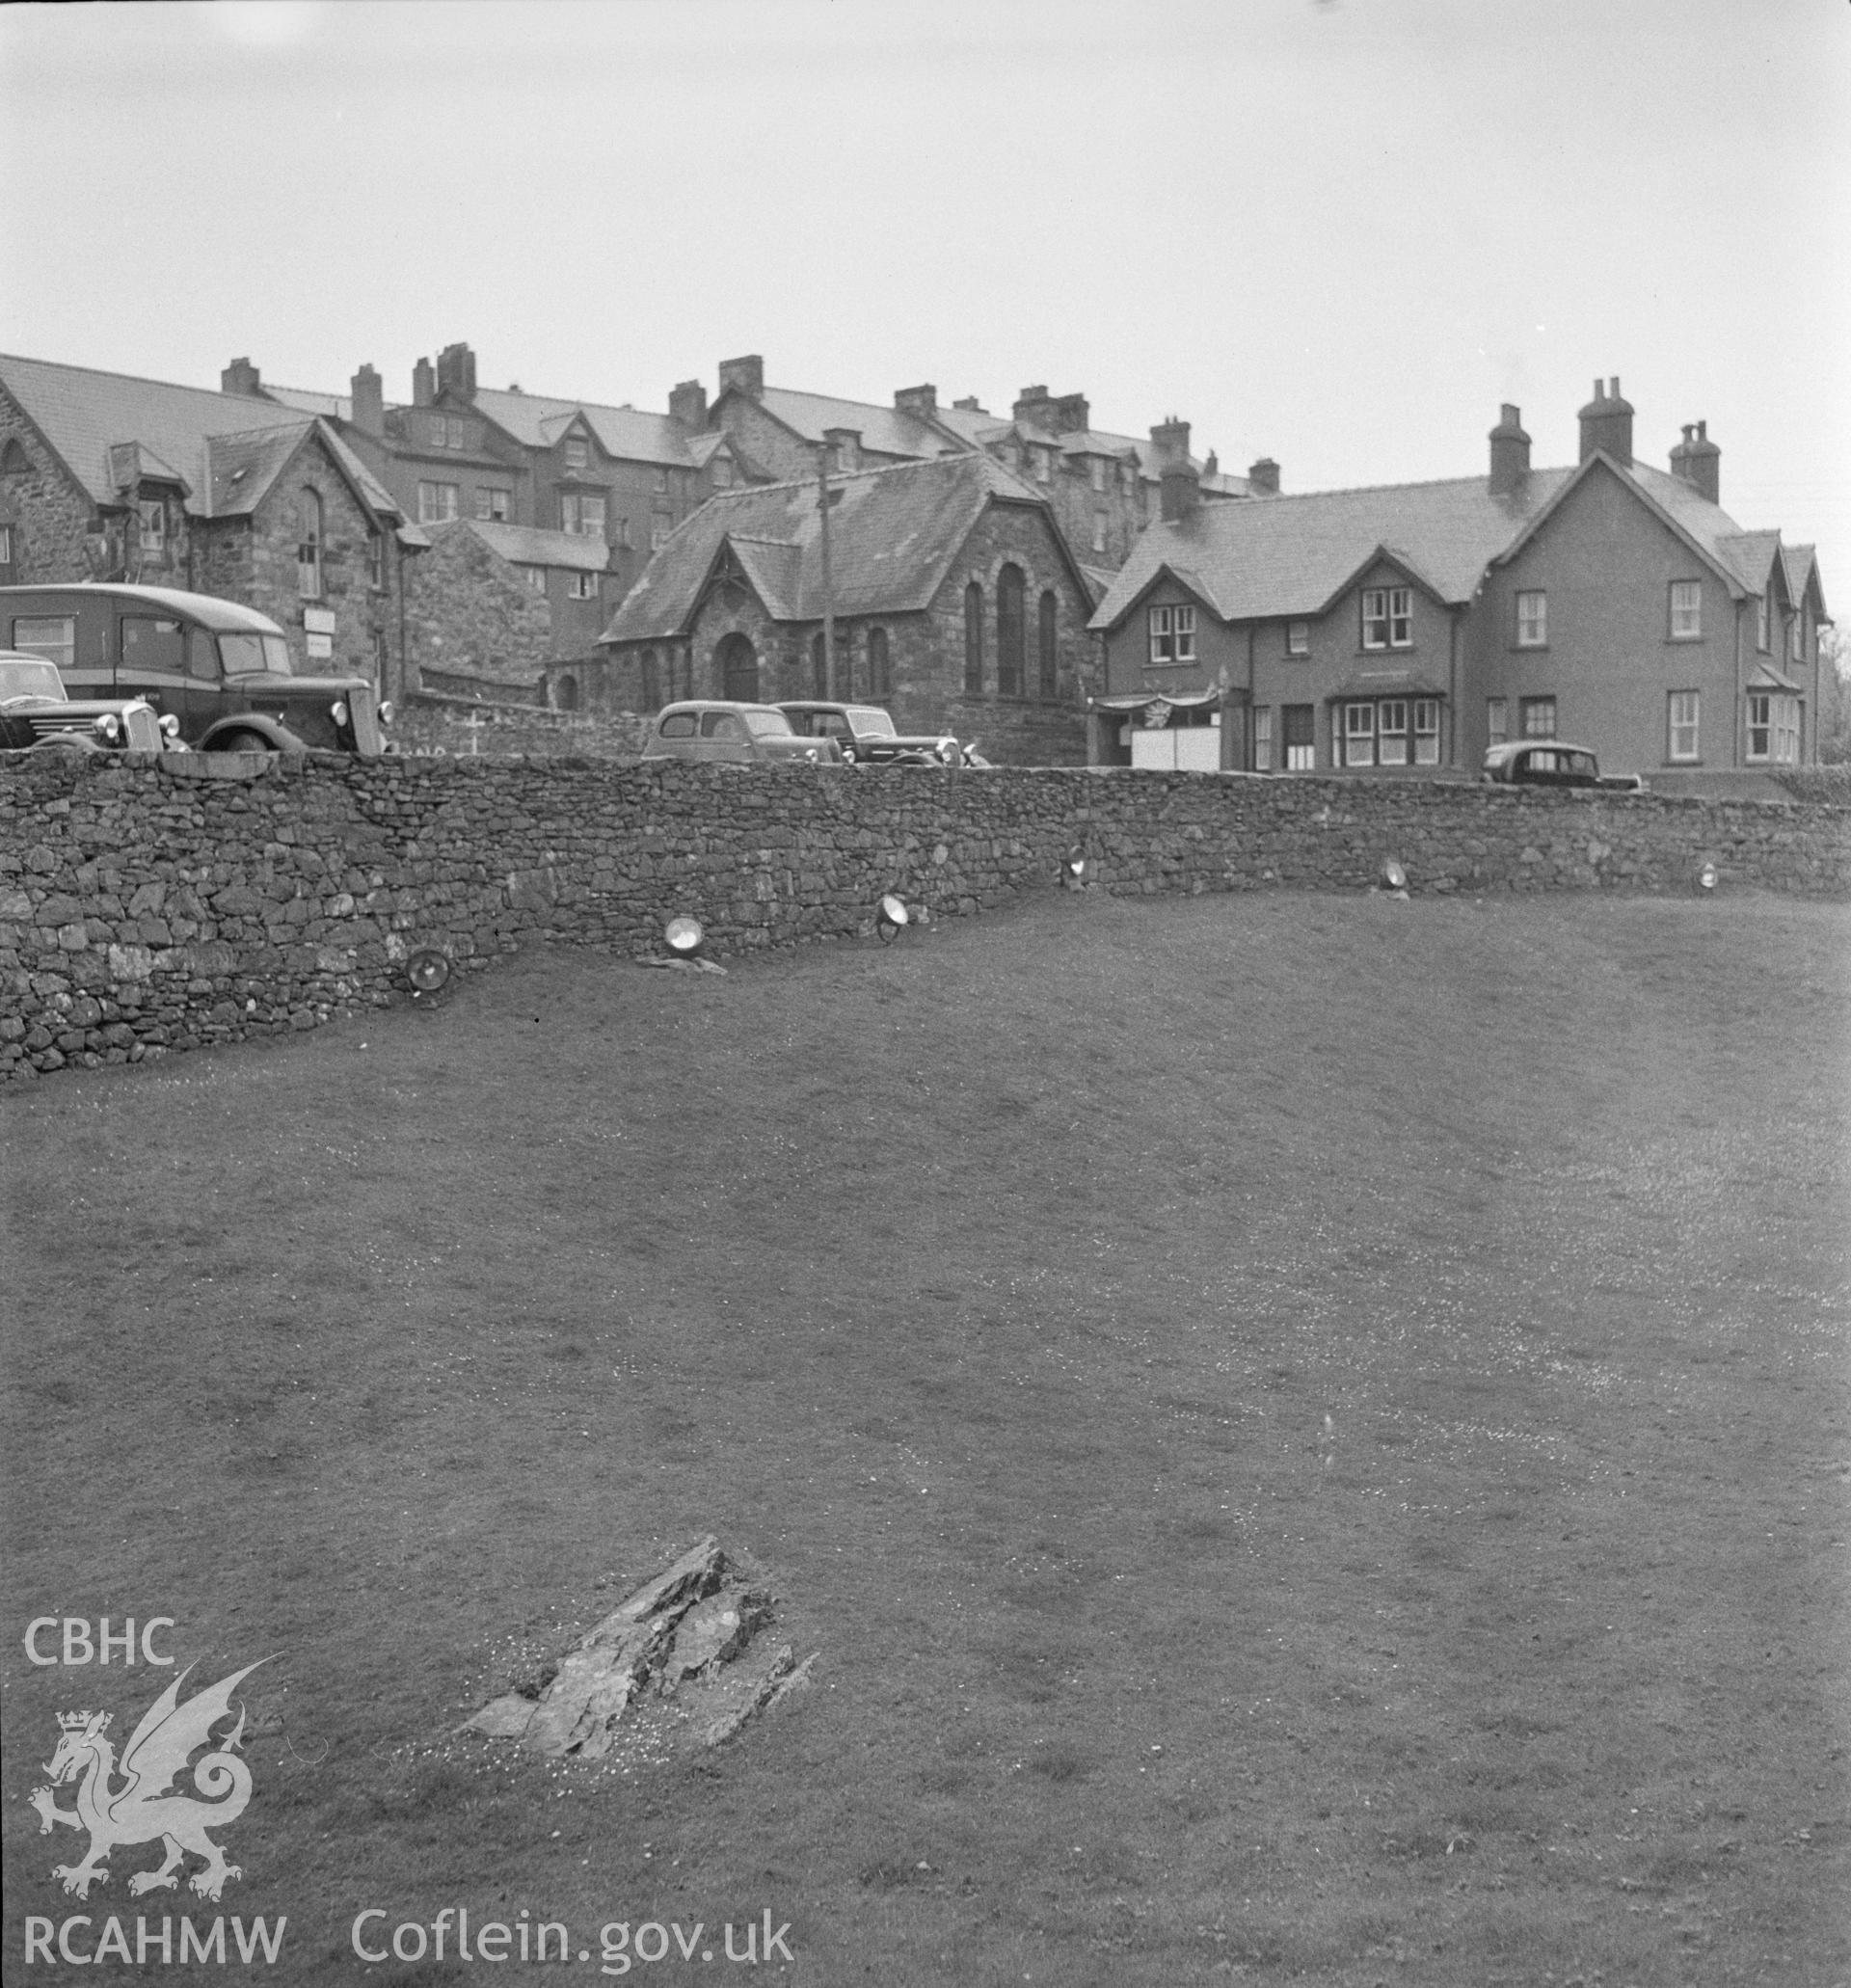 Digital copy of a nitrate negative showing Harlech Castle, dated 1944.